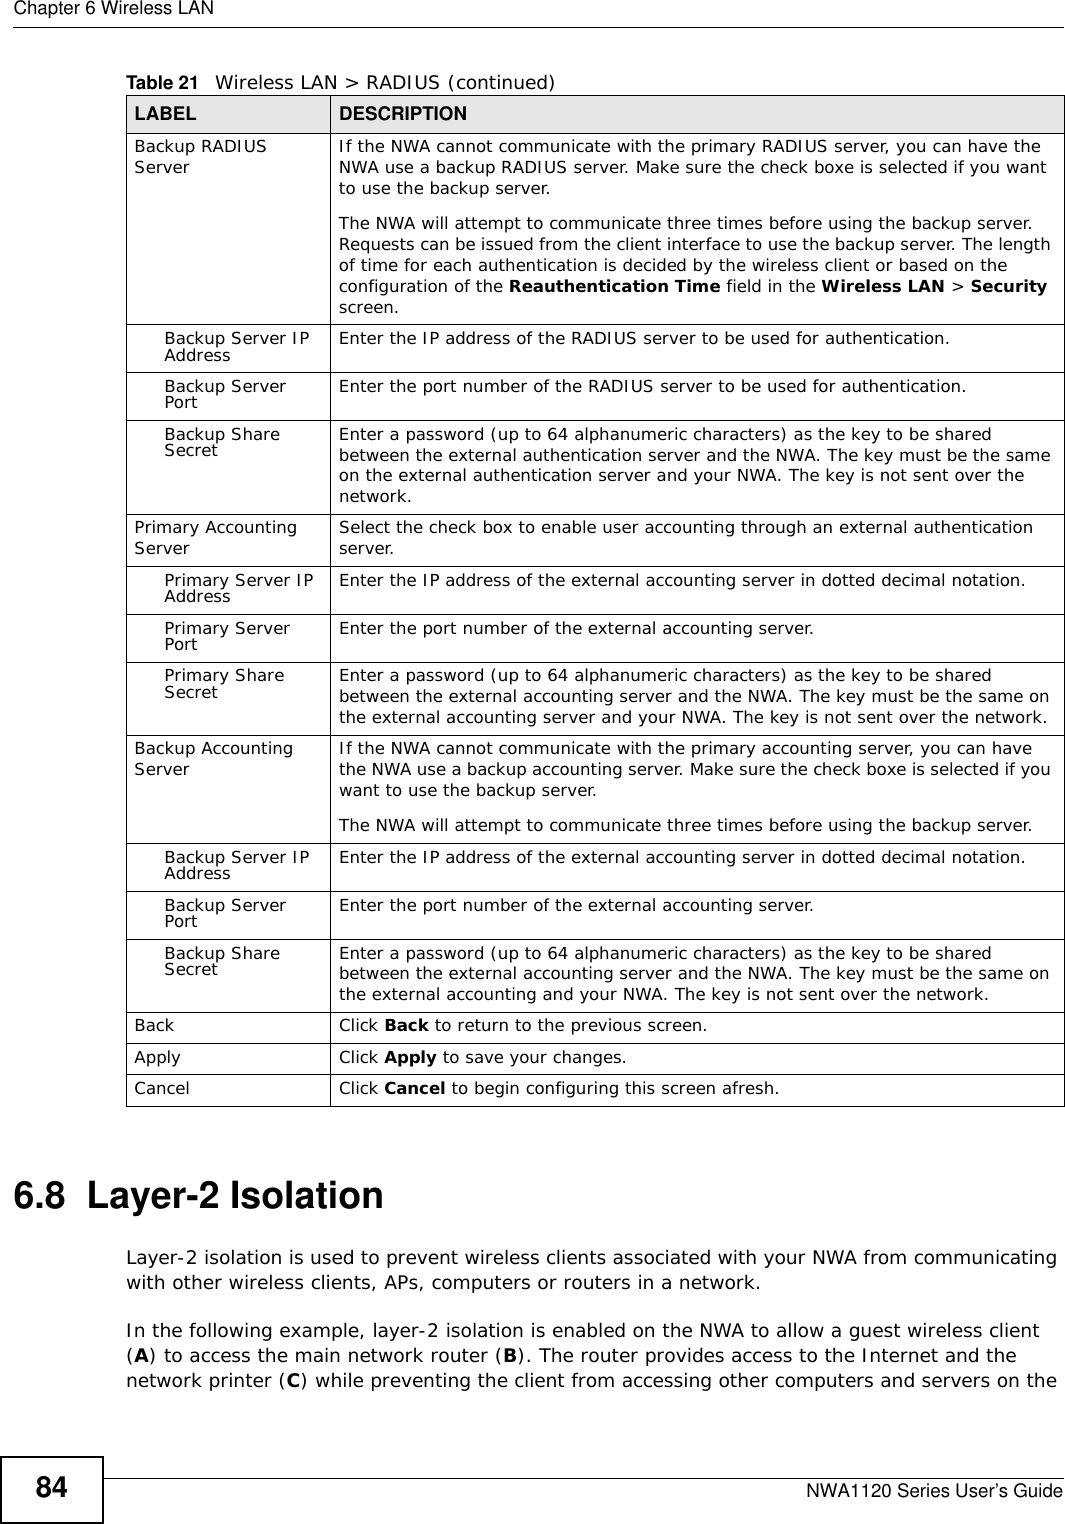 Chapter 6 Wireless LANNWA1120 Series User’s Guide846.8  Layer-2 IsolationLayer-2 isolation is used to prevent wireless clients associated with your NWA from communicating with other wireless clients, APs, computers or routers in a network.In the following example, layer-2 isolation is enabled on the NWA to allow a guest wireless client (A) to access the main network router (B). The router provides access to the Internet and the network printer (C) while preventing the client from accessing other computers and servers on the Backup RADIUS Server  If the NWA cannot communicate with the primary RADIUS server, you can have the NWA use a backup RADIUS server. Make sure the check boxe is selected if you want to use the backup server.The NWA will attempt to communicate three times before using the backup server. Requests can be issued from the client interface to use the backup server. The length of time for each authentication is decided by the wireless client or based on the configuration of the Reauthentication Time field in the Wireless LAN &gt; Security screen.Backup Server IP Address Enter the IP address of the RADIUS server to be used for authentication.Backup Server Port  Enter the port number of the RADIUS server to be used for authentication. Backup Share Secret Enter a password (up to 64 alphanumeric characters) as the key to be shared between the external authentication server and the NWA. The key must be the same on the external authentication server and your NWA. The key is not sent over the network.Primary Accounting Server Select the check box to enable user accounting through an external authentication server.Primary Server IP Address Enter the IP address of the external accounting server in dotted decimal notation. Primary Server Port  Enter the port number of the external accounting server. Primary Share Secret Enter a password (up to 64 alphanumeric characters) as the key to be shared between the external accounting server and the NWA. The key must be the same on the external accounting server and your NWA. The key is not sent over the network.Backup Accounting Server  If the NWA cannot communicate with the primary accounting server, you can have the NWA use a backup accounting server. Make sure the check boxe is selected if you want to use the backup server.The NWA will attempt to communicate three times before using the backup server. Backup Server IP Address Enter the IP address of the external accounting server in dotted decimal notation. Backup Server Port  Enter the port number of the external accounting server. Backup Share Secret Enter a password (up to 64 alphanumeric characters) as the key to be shared between the external accounting server and the NWA. The key must be the same on the external accounting and your NWA. The key is not sent over the network.Back Click Back to return to the previous screen.Apply Click Apply to save your changes.Cancel Click Cancel to begin configuring this screen afresh.Table 21   Wireless LAN &gt; RADIUS (continued)LABEL DESCRIPTION